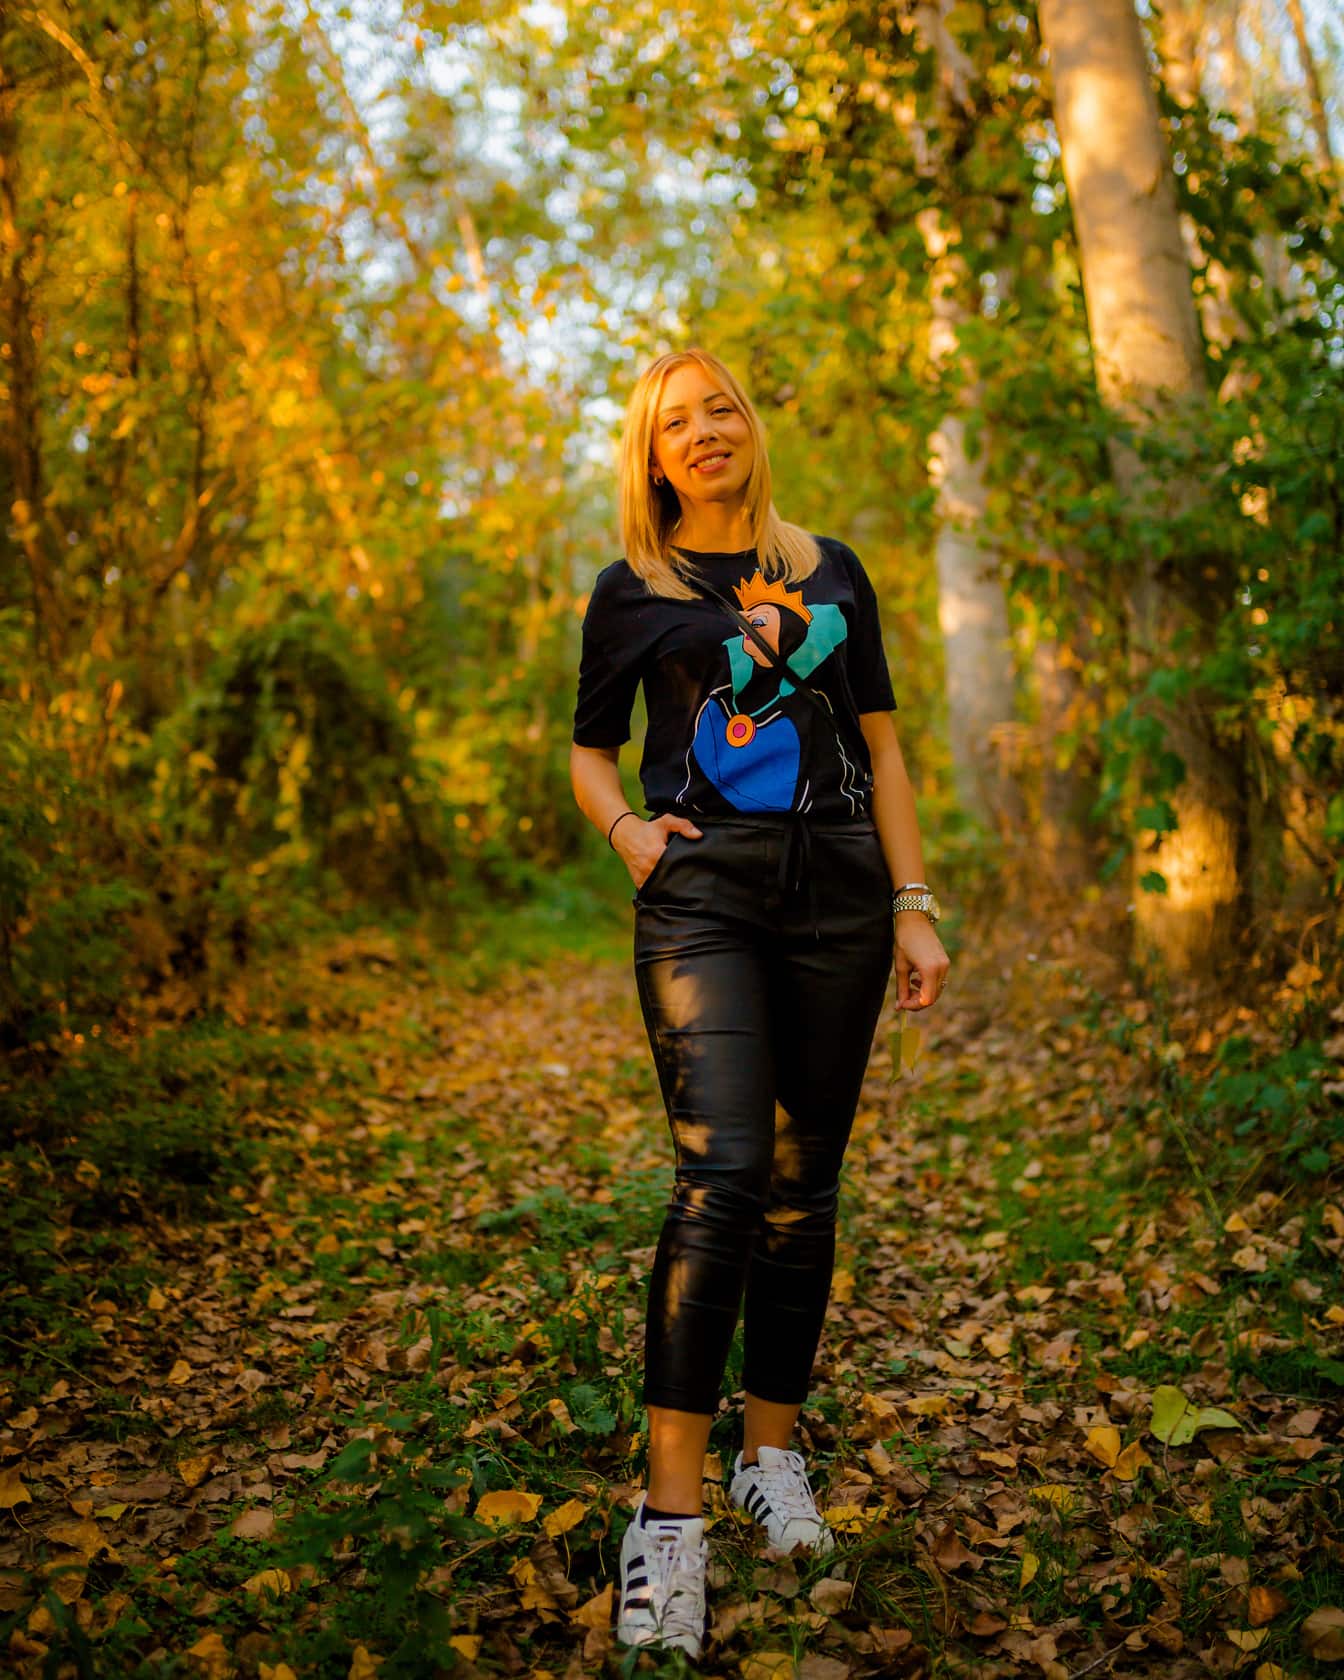 Beautiful smiling blonde standing in a forest in black fashionable outfit